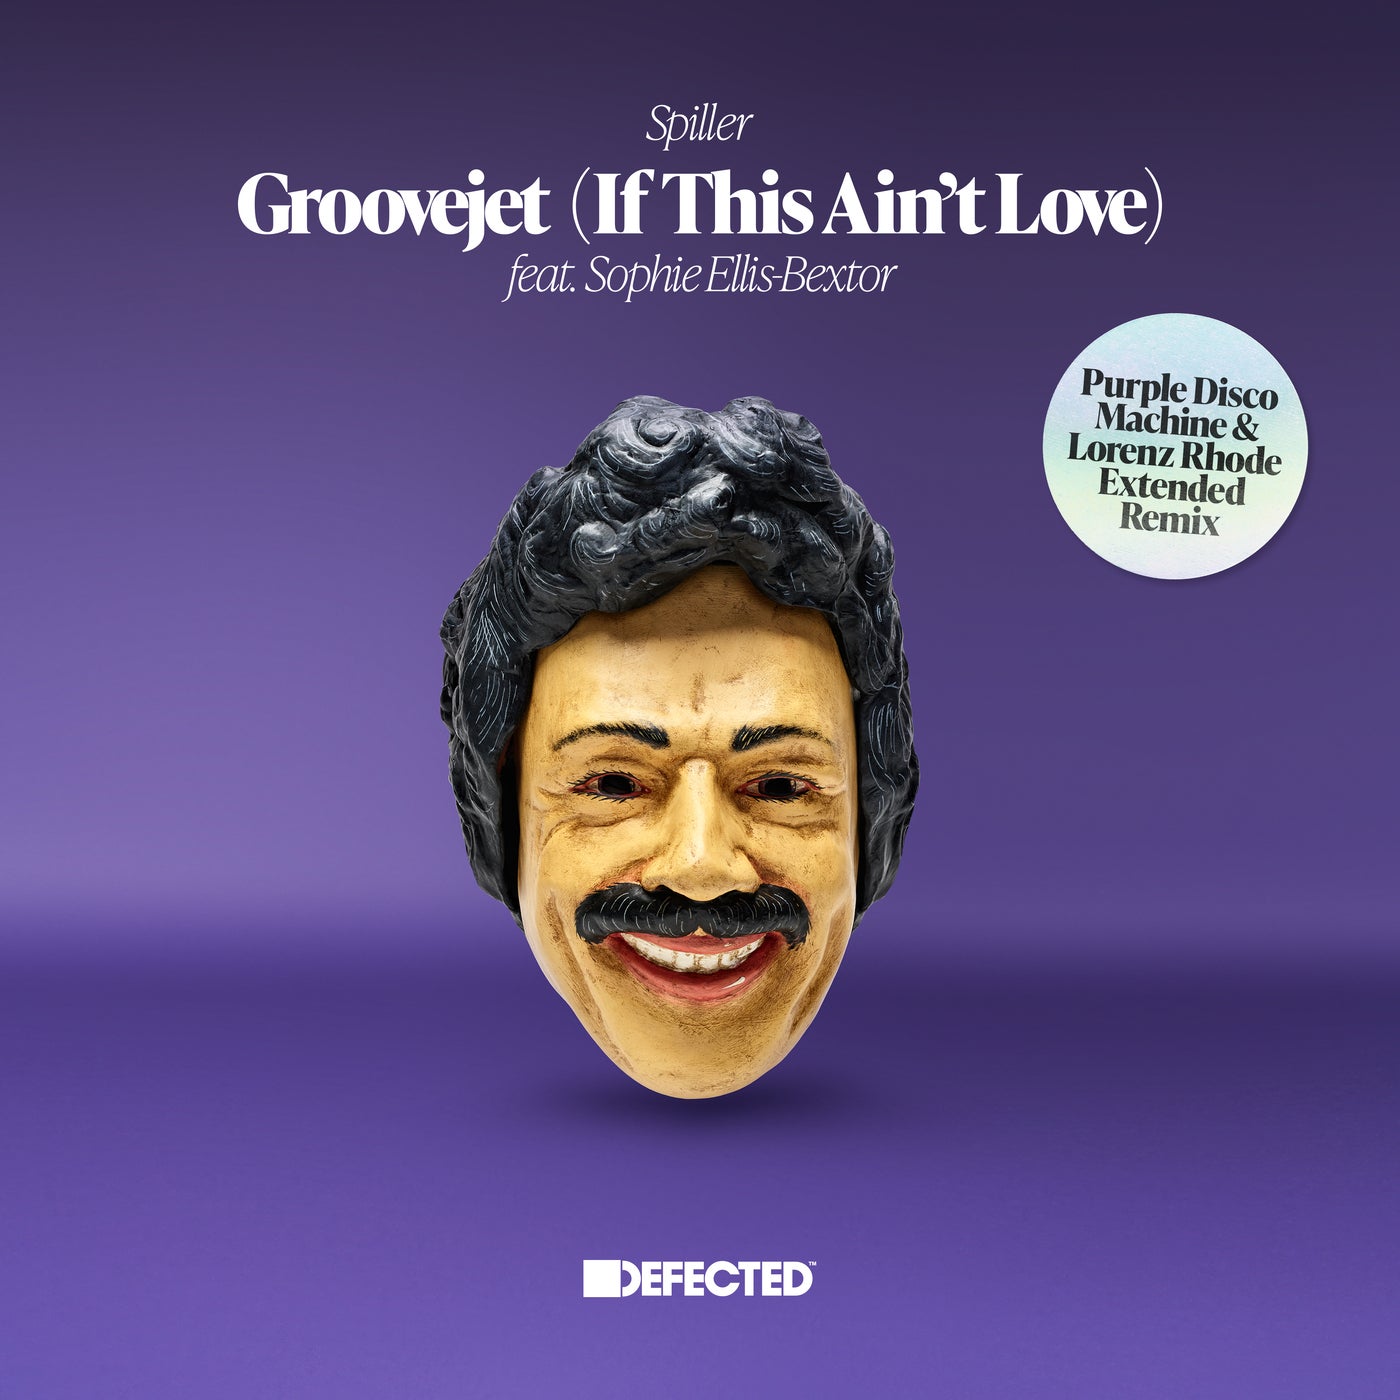 Download Groovejet (If This Ain't Love) - Purple Disco Machine & Lorenz Rhode Extended Remix on Electrobuzz